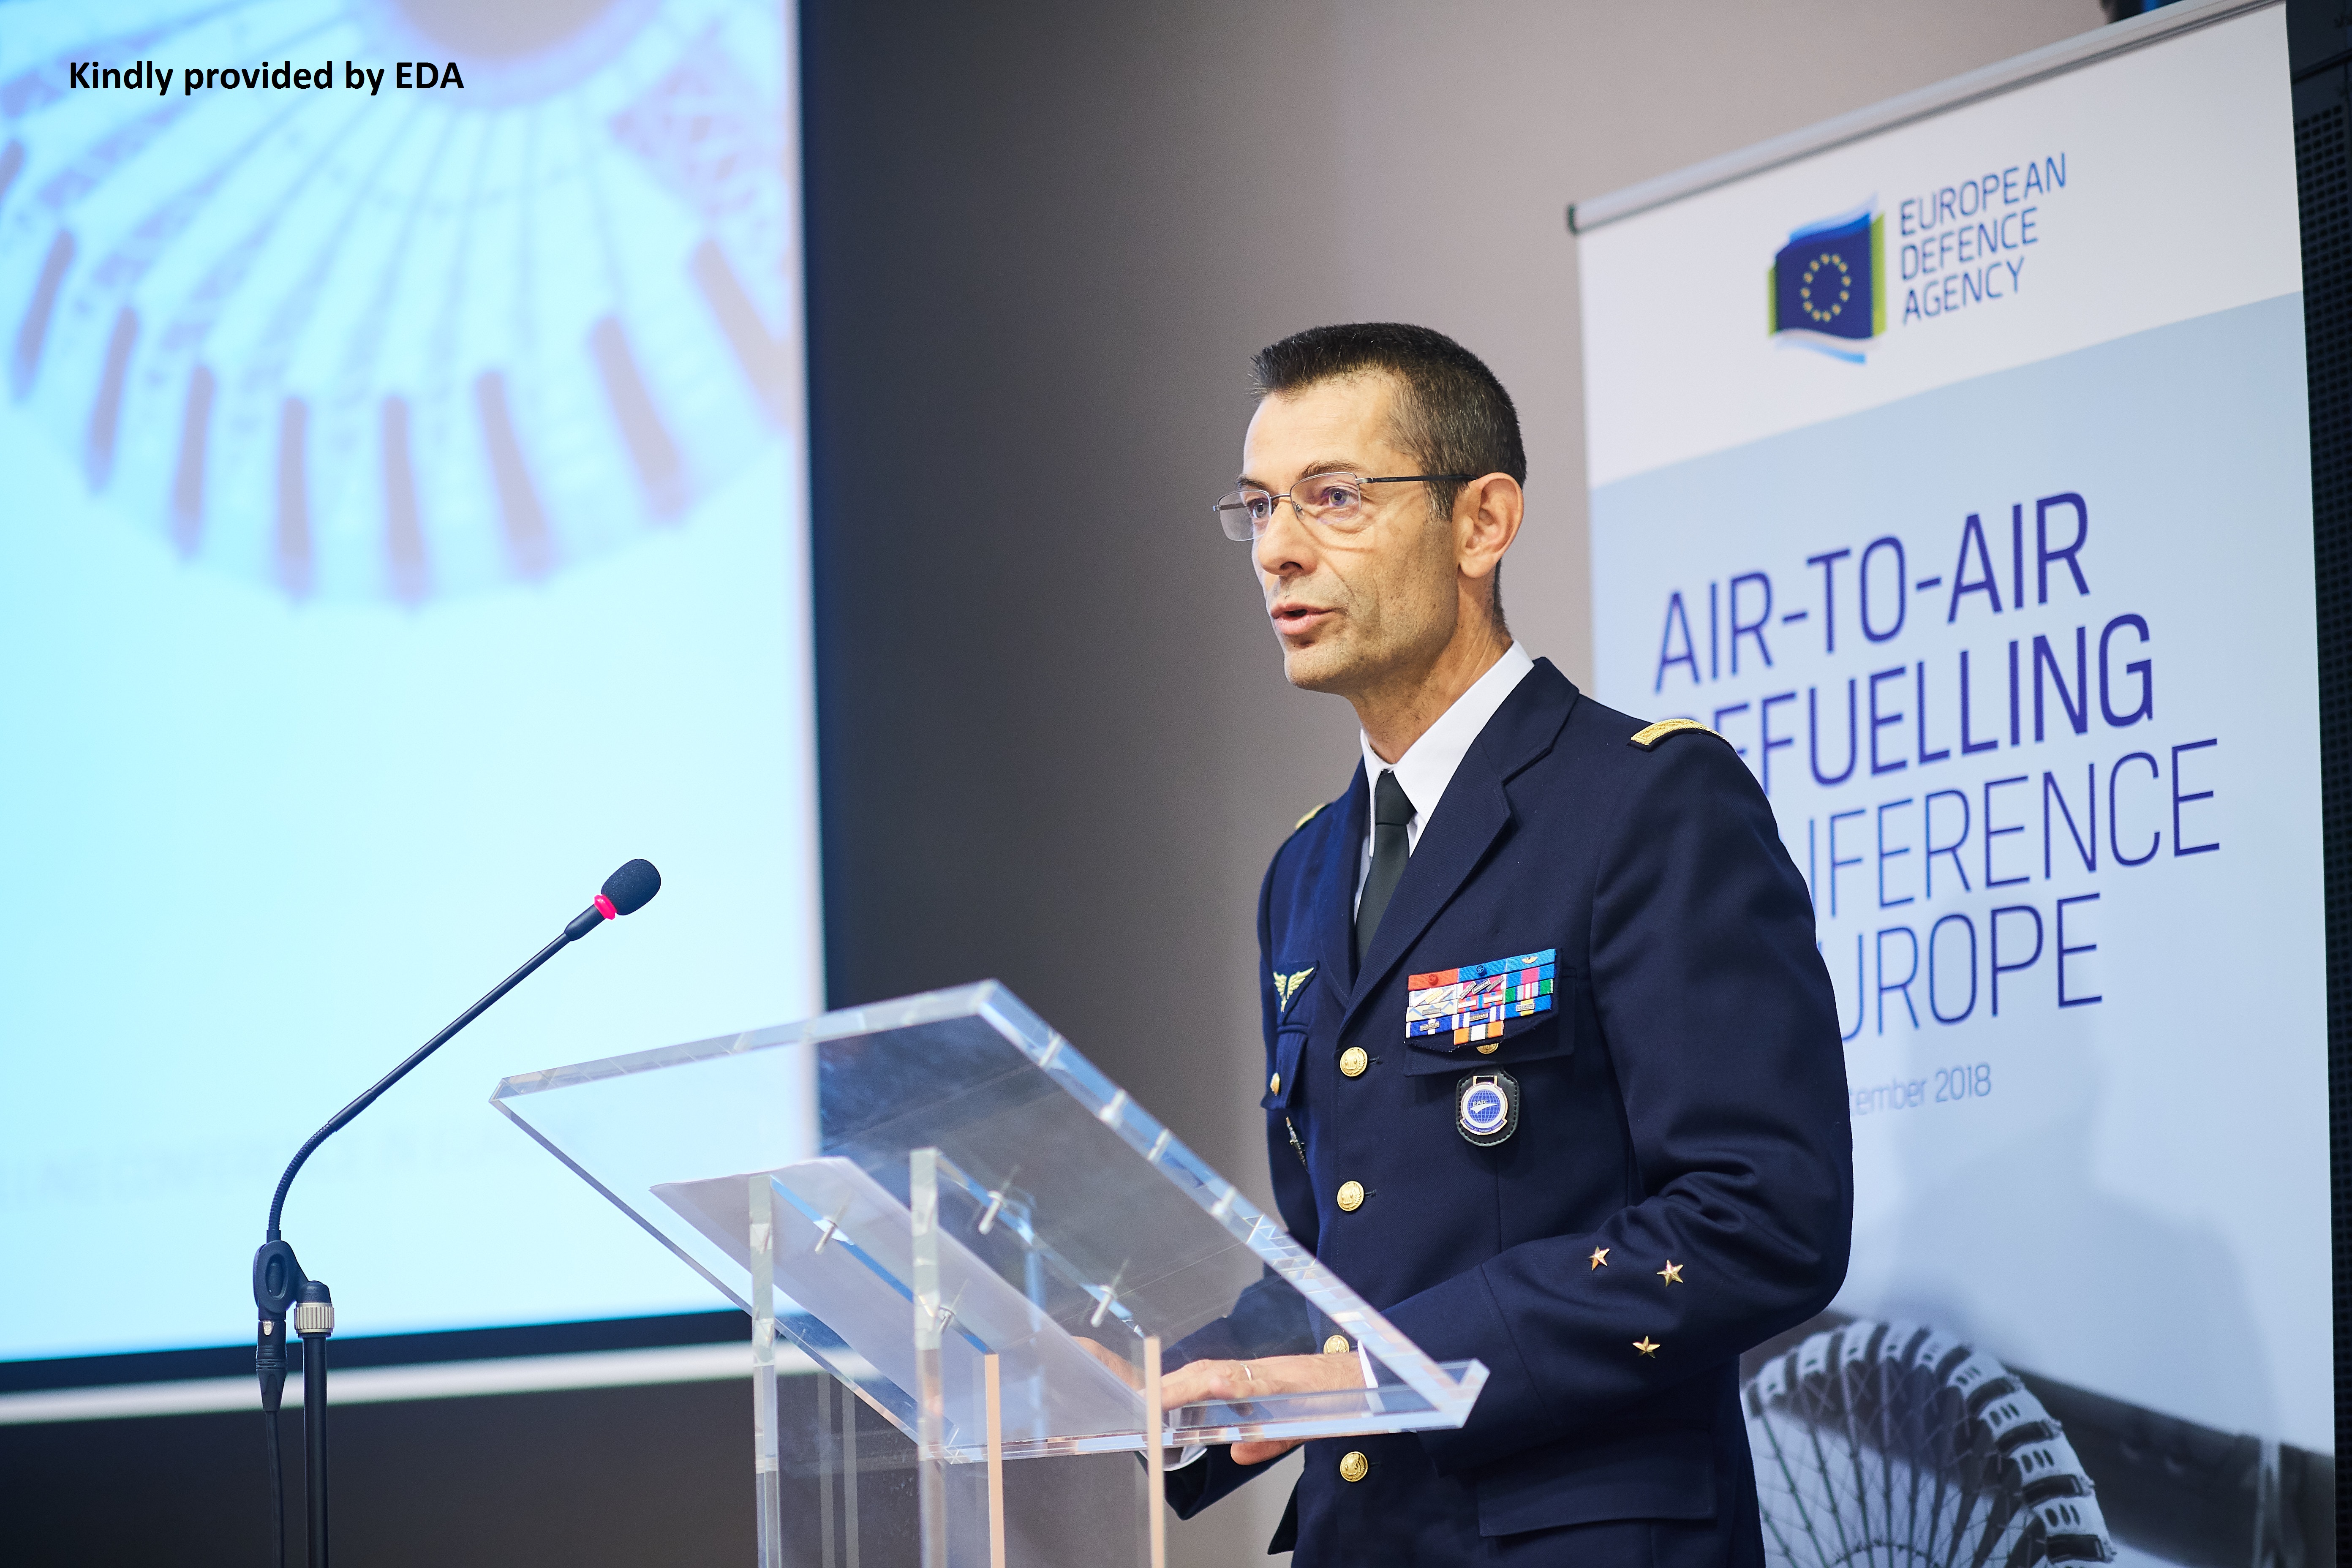 The EATC commander at the first air-to-air refuelling conference in Europe